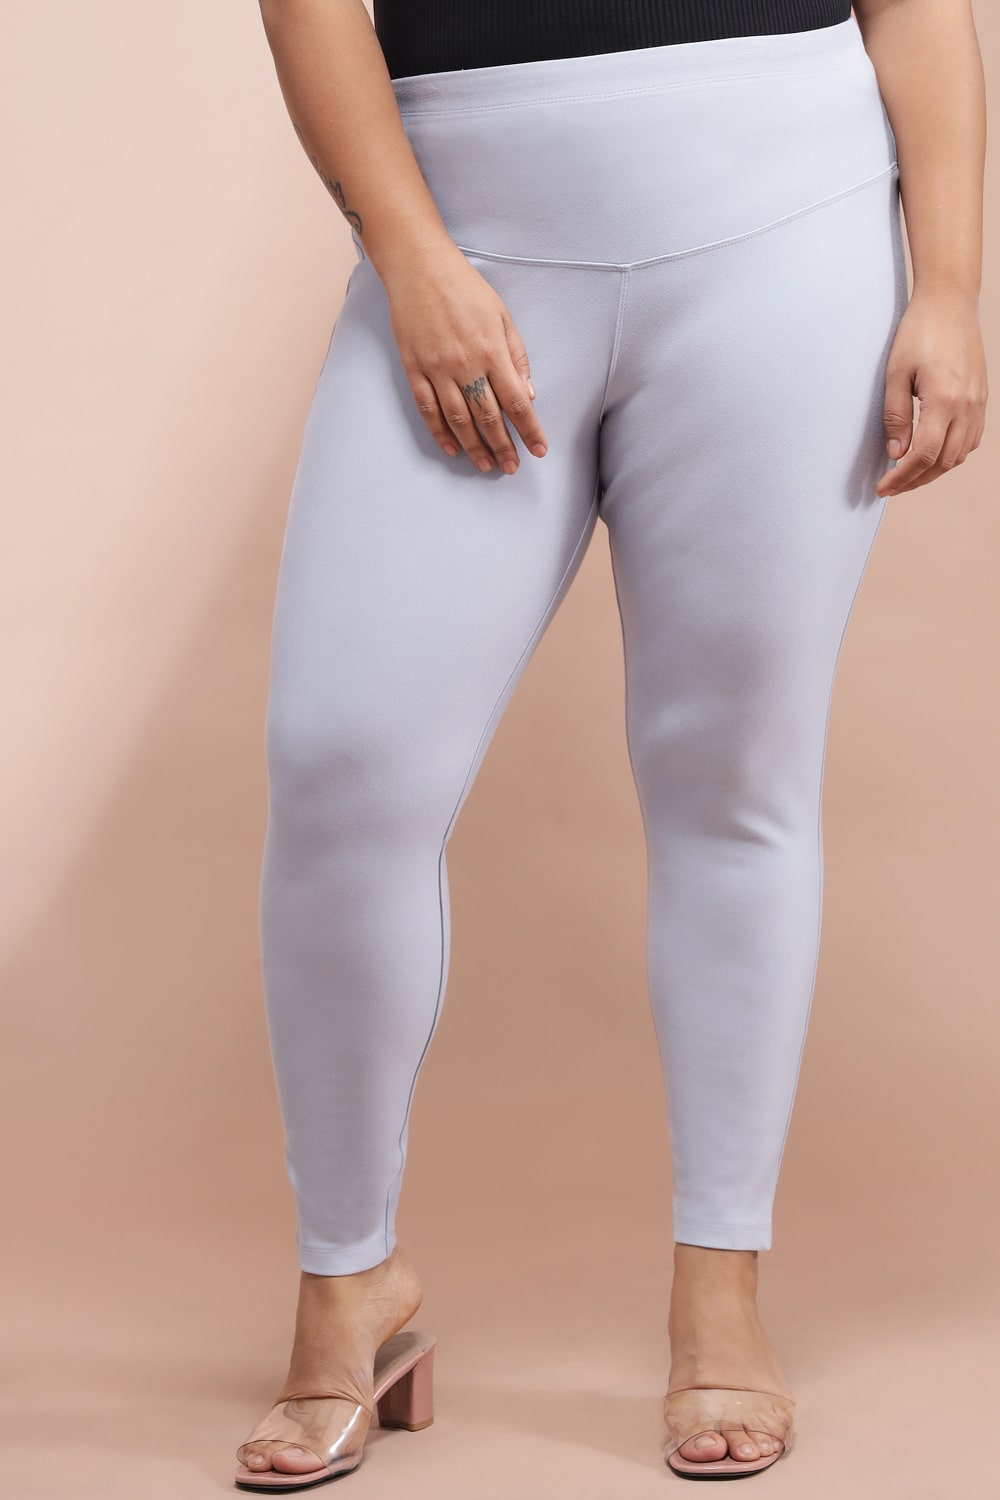 Us Size Fitness & Yoga Wear Seamless Leggings Sexy Pants with Pockets for Women  Crotchless Nude Custom Yoga Leggings Pants - China Yoga Leggings and Yoga  Pants price